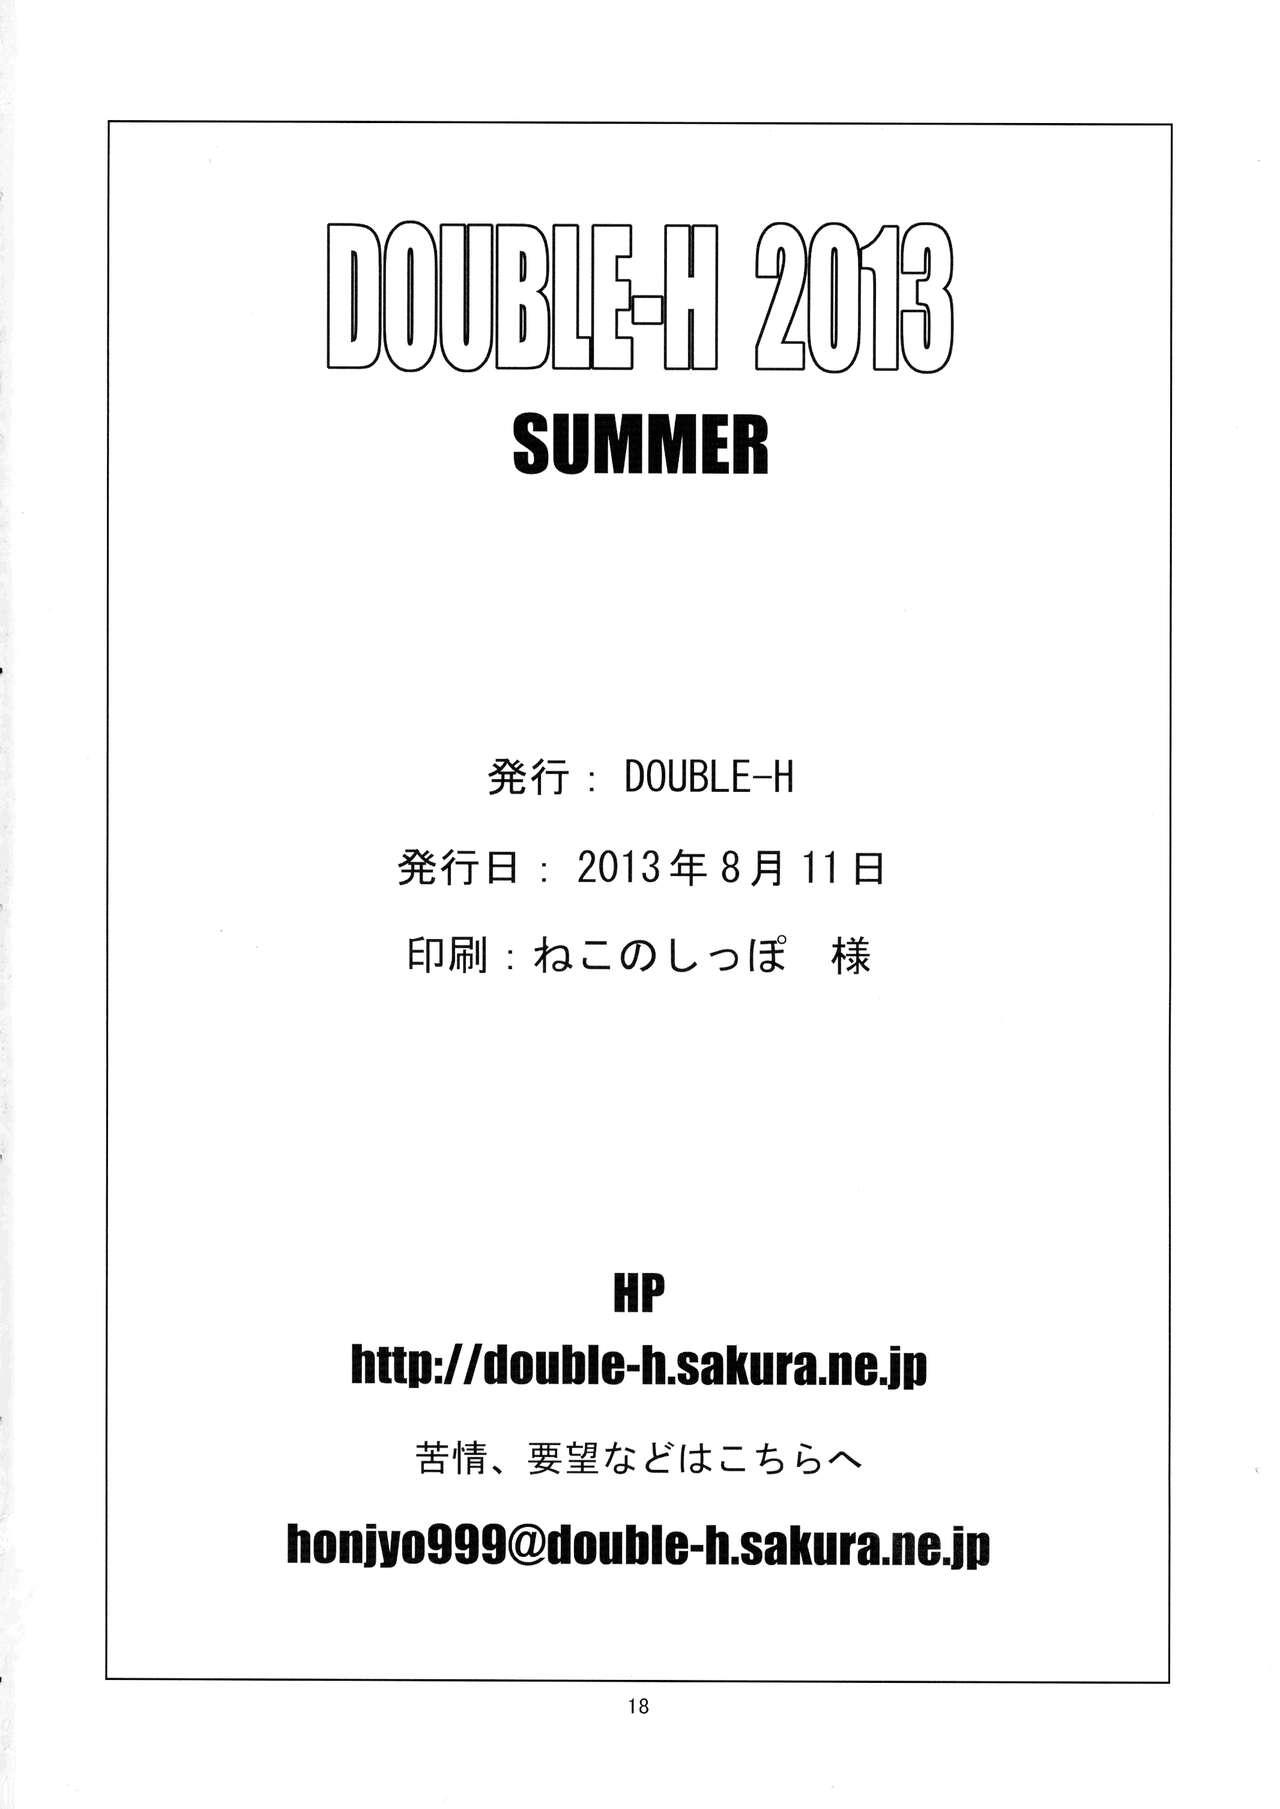 DOUBLE-H 2013 SUMMER 17